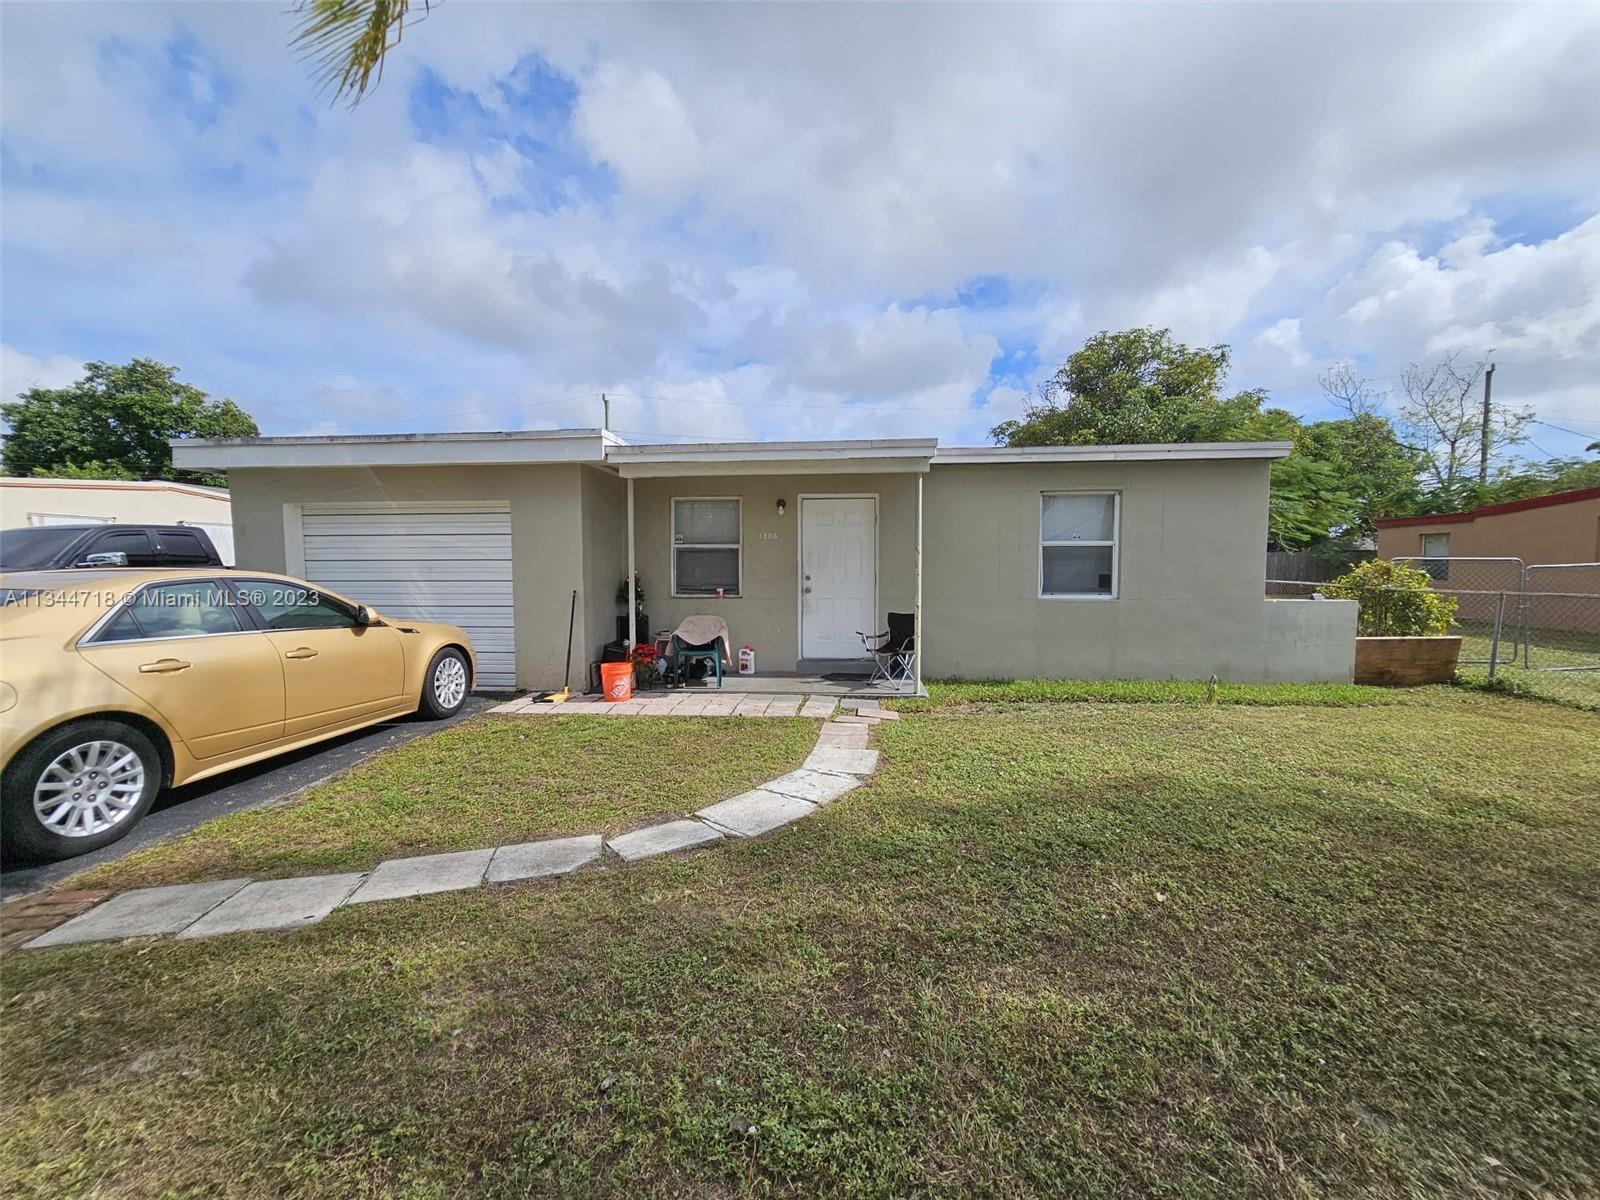 Photo of 1808 NW 25th Ave in Fort Lauderdale, FL